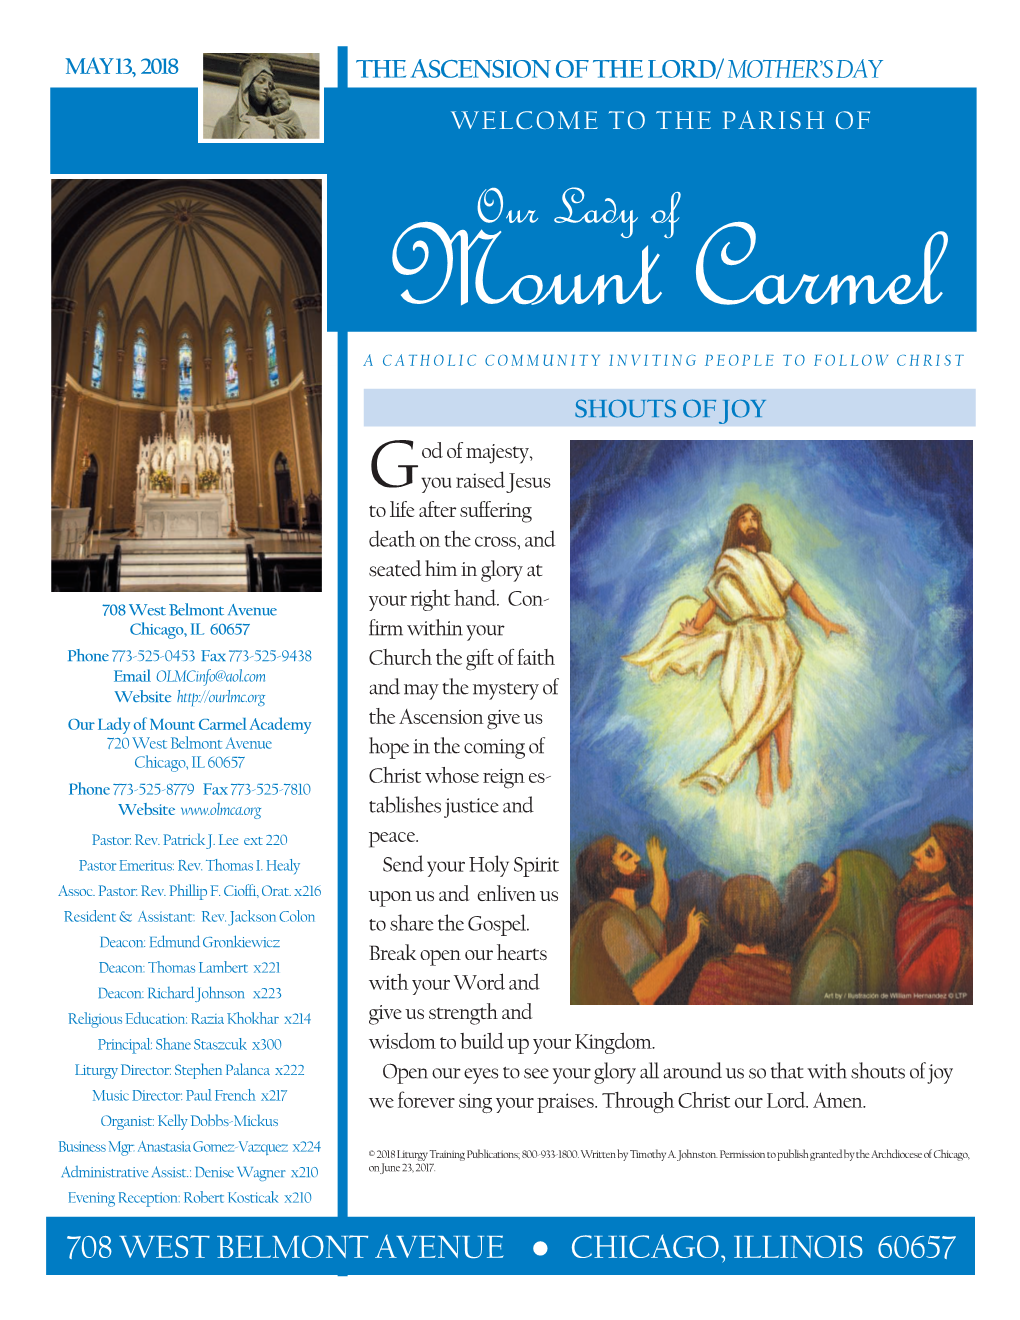 Our Lady of Mount Carmel a CATHOLIC COMMUNITY INVITING PEOPLE to FOLLOW CHRI S T